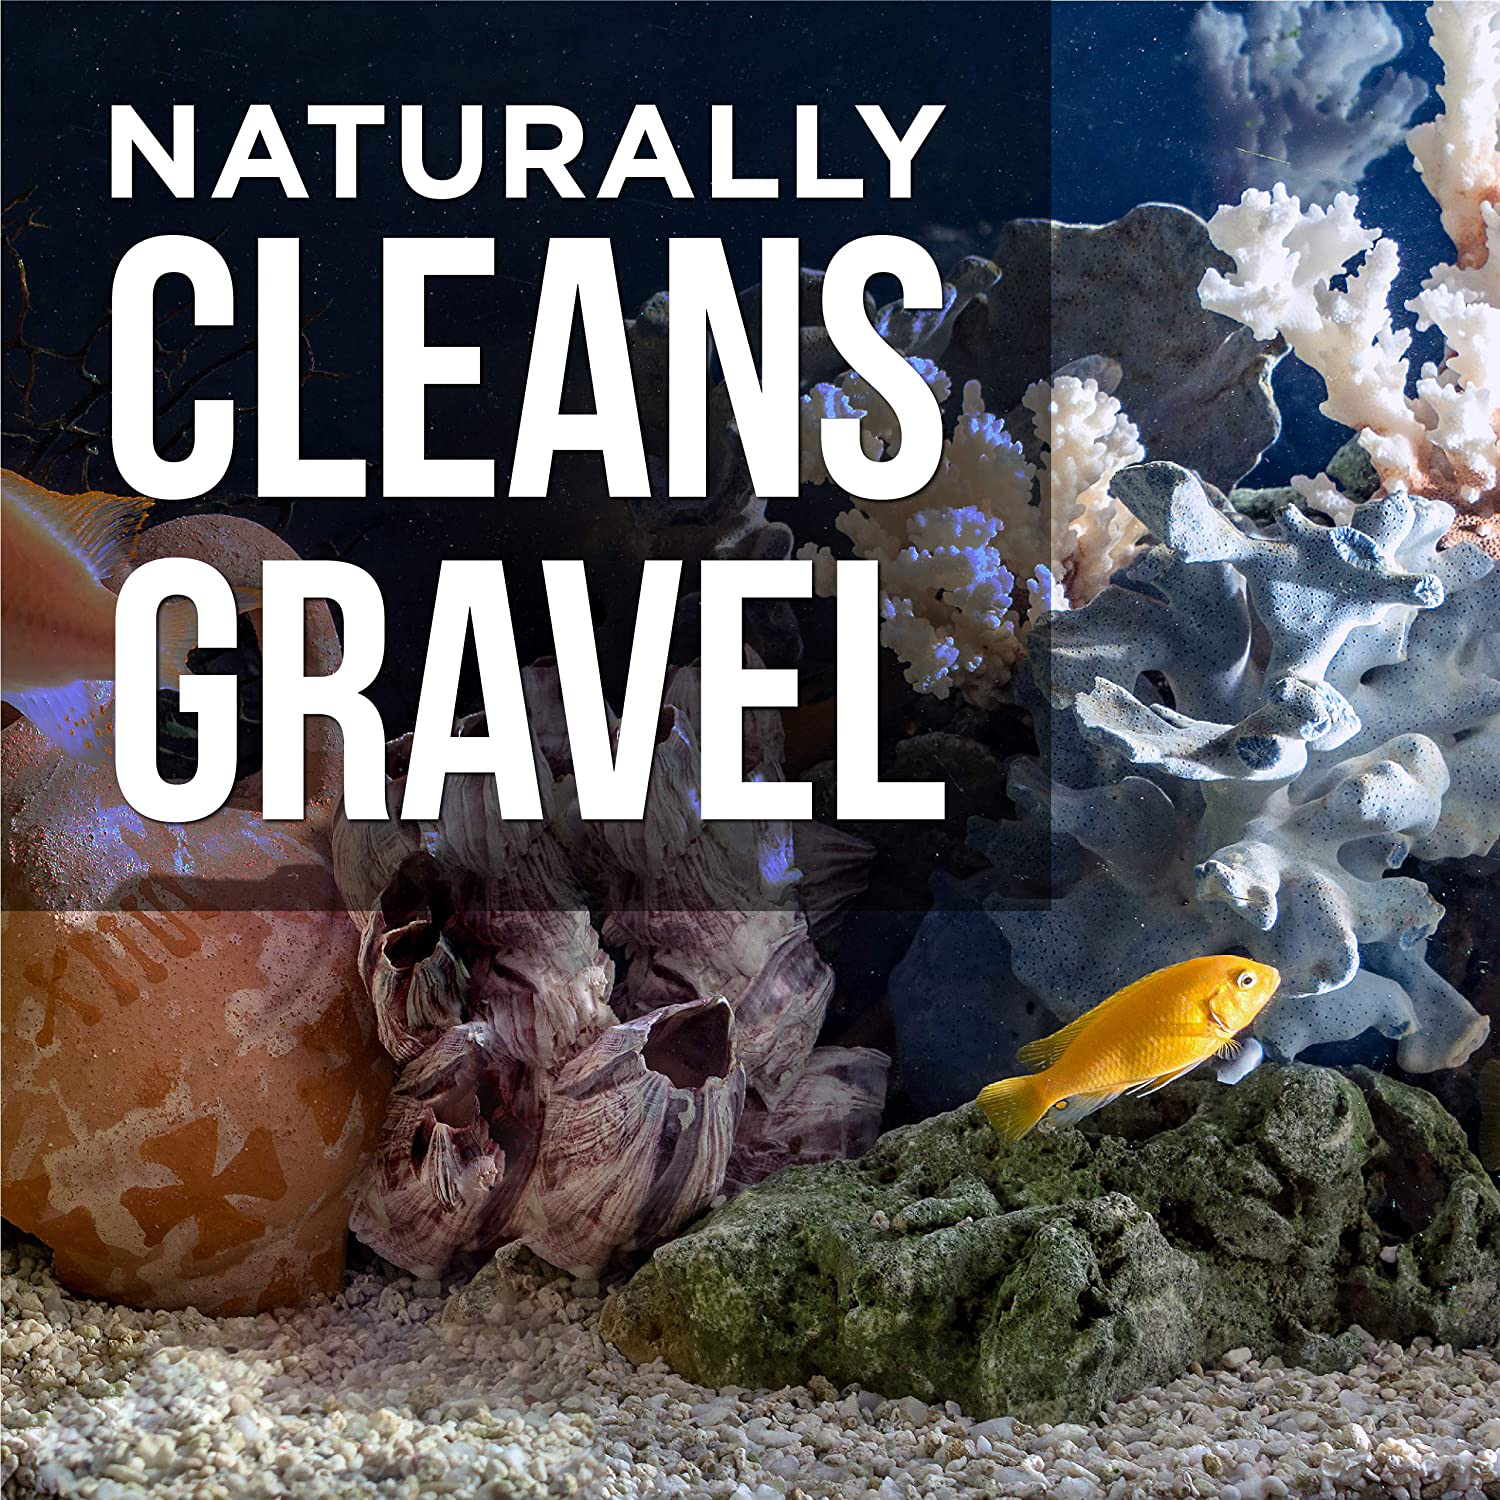 Natural Rapport Aquarium Gravel Cleaner - the Only Gravel Cleaner Fish Need - Professional Aquarium Gravel Cleaner to Naturally Maintain a Healthier Tank, Reducing Fish Waste and Toxins (16 Fl Oz) Animals & Pet Supplies > Pet Supplies > Fish Supplies > Aquarium Cleaning Supplies Natural Rapport   